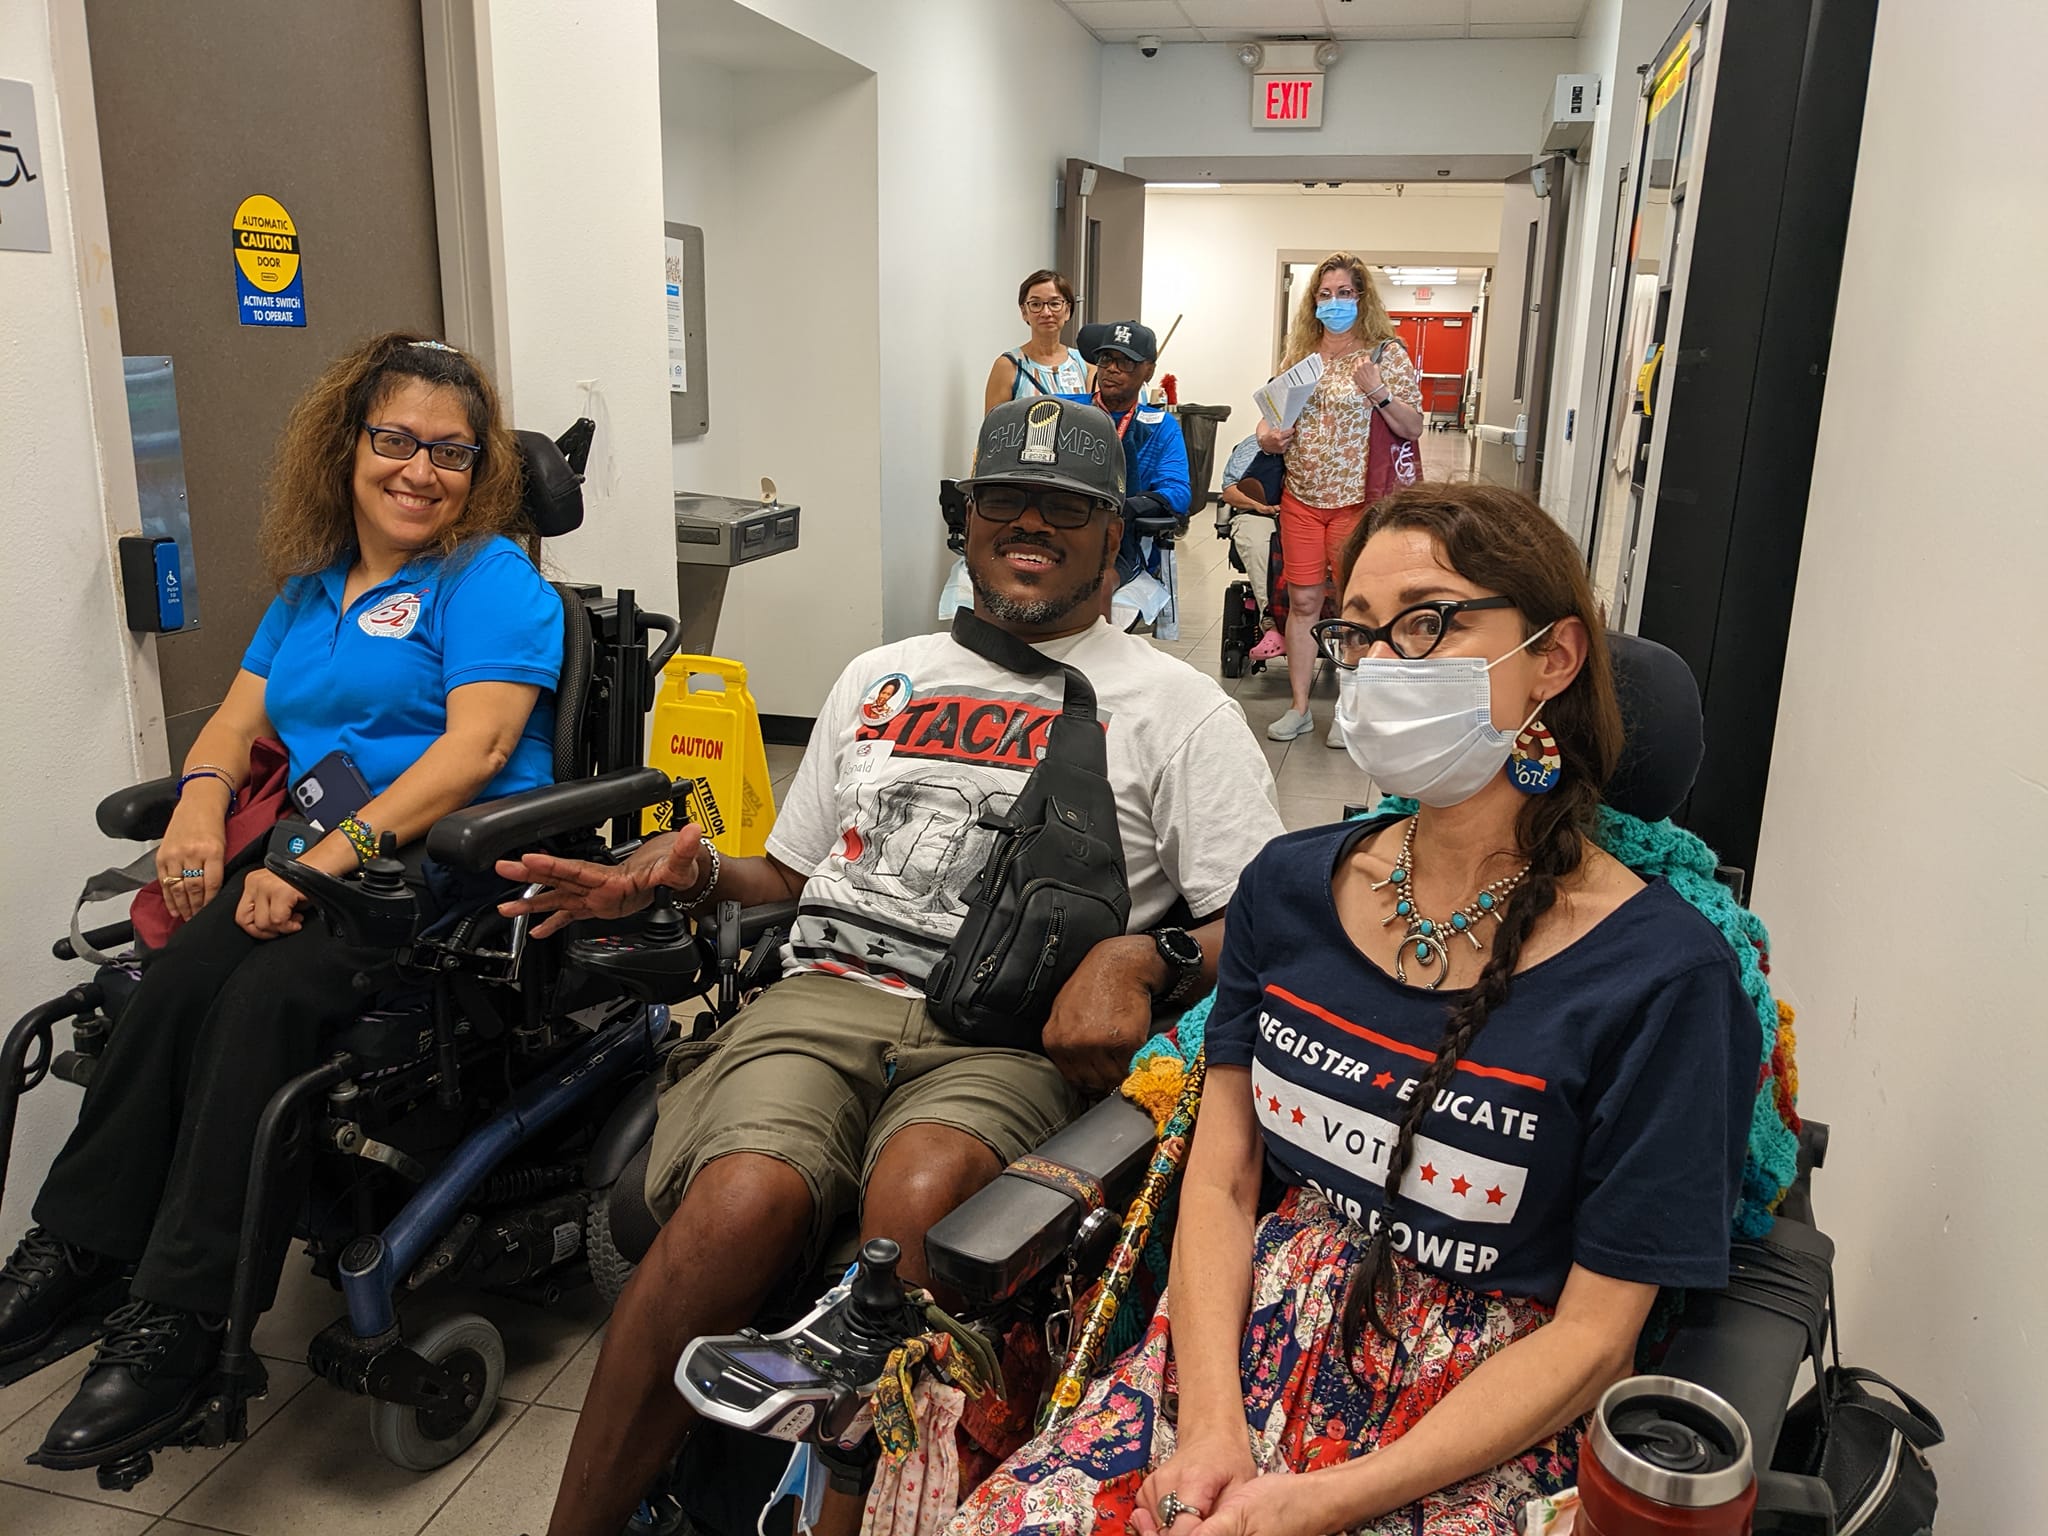 A group of three individuals in wheelchairs in a hallway. The person on the left is a woman with brown hair wearing glasses and a blue polo shirt. The person in the middle is a man wearing a white t-shirt, sunglasses, and a cap. The person on the right is a woman wearing a mask, glasses, and a dark blue shirt that reads "Register Educate Vote Power."